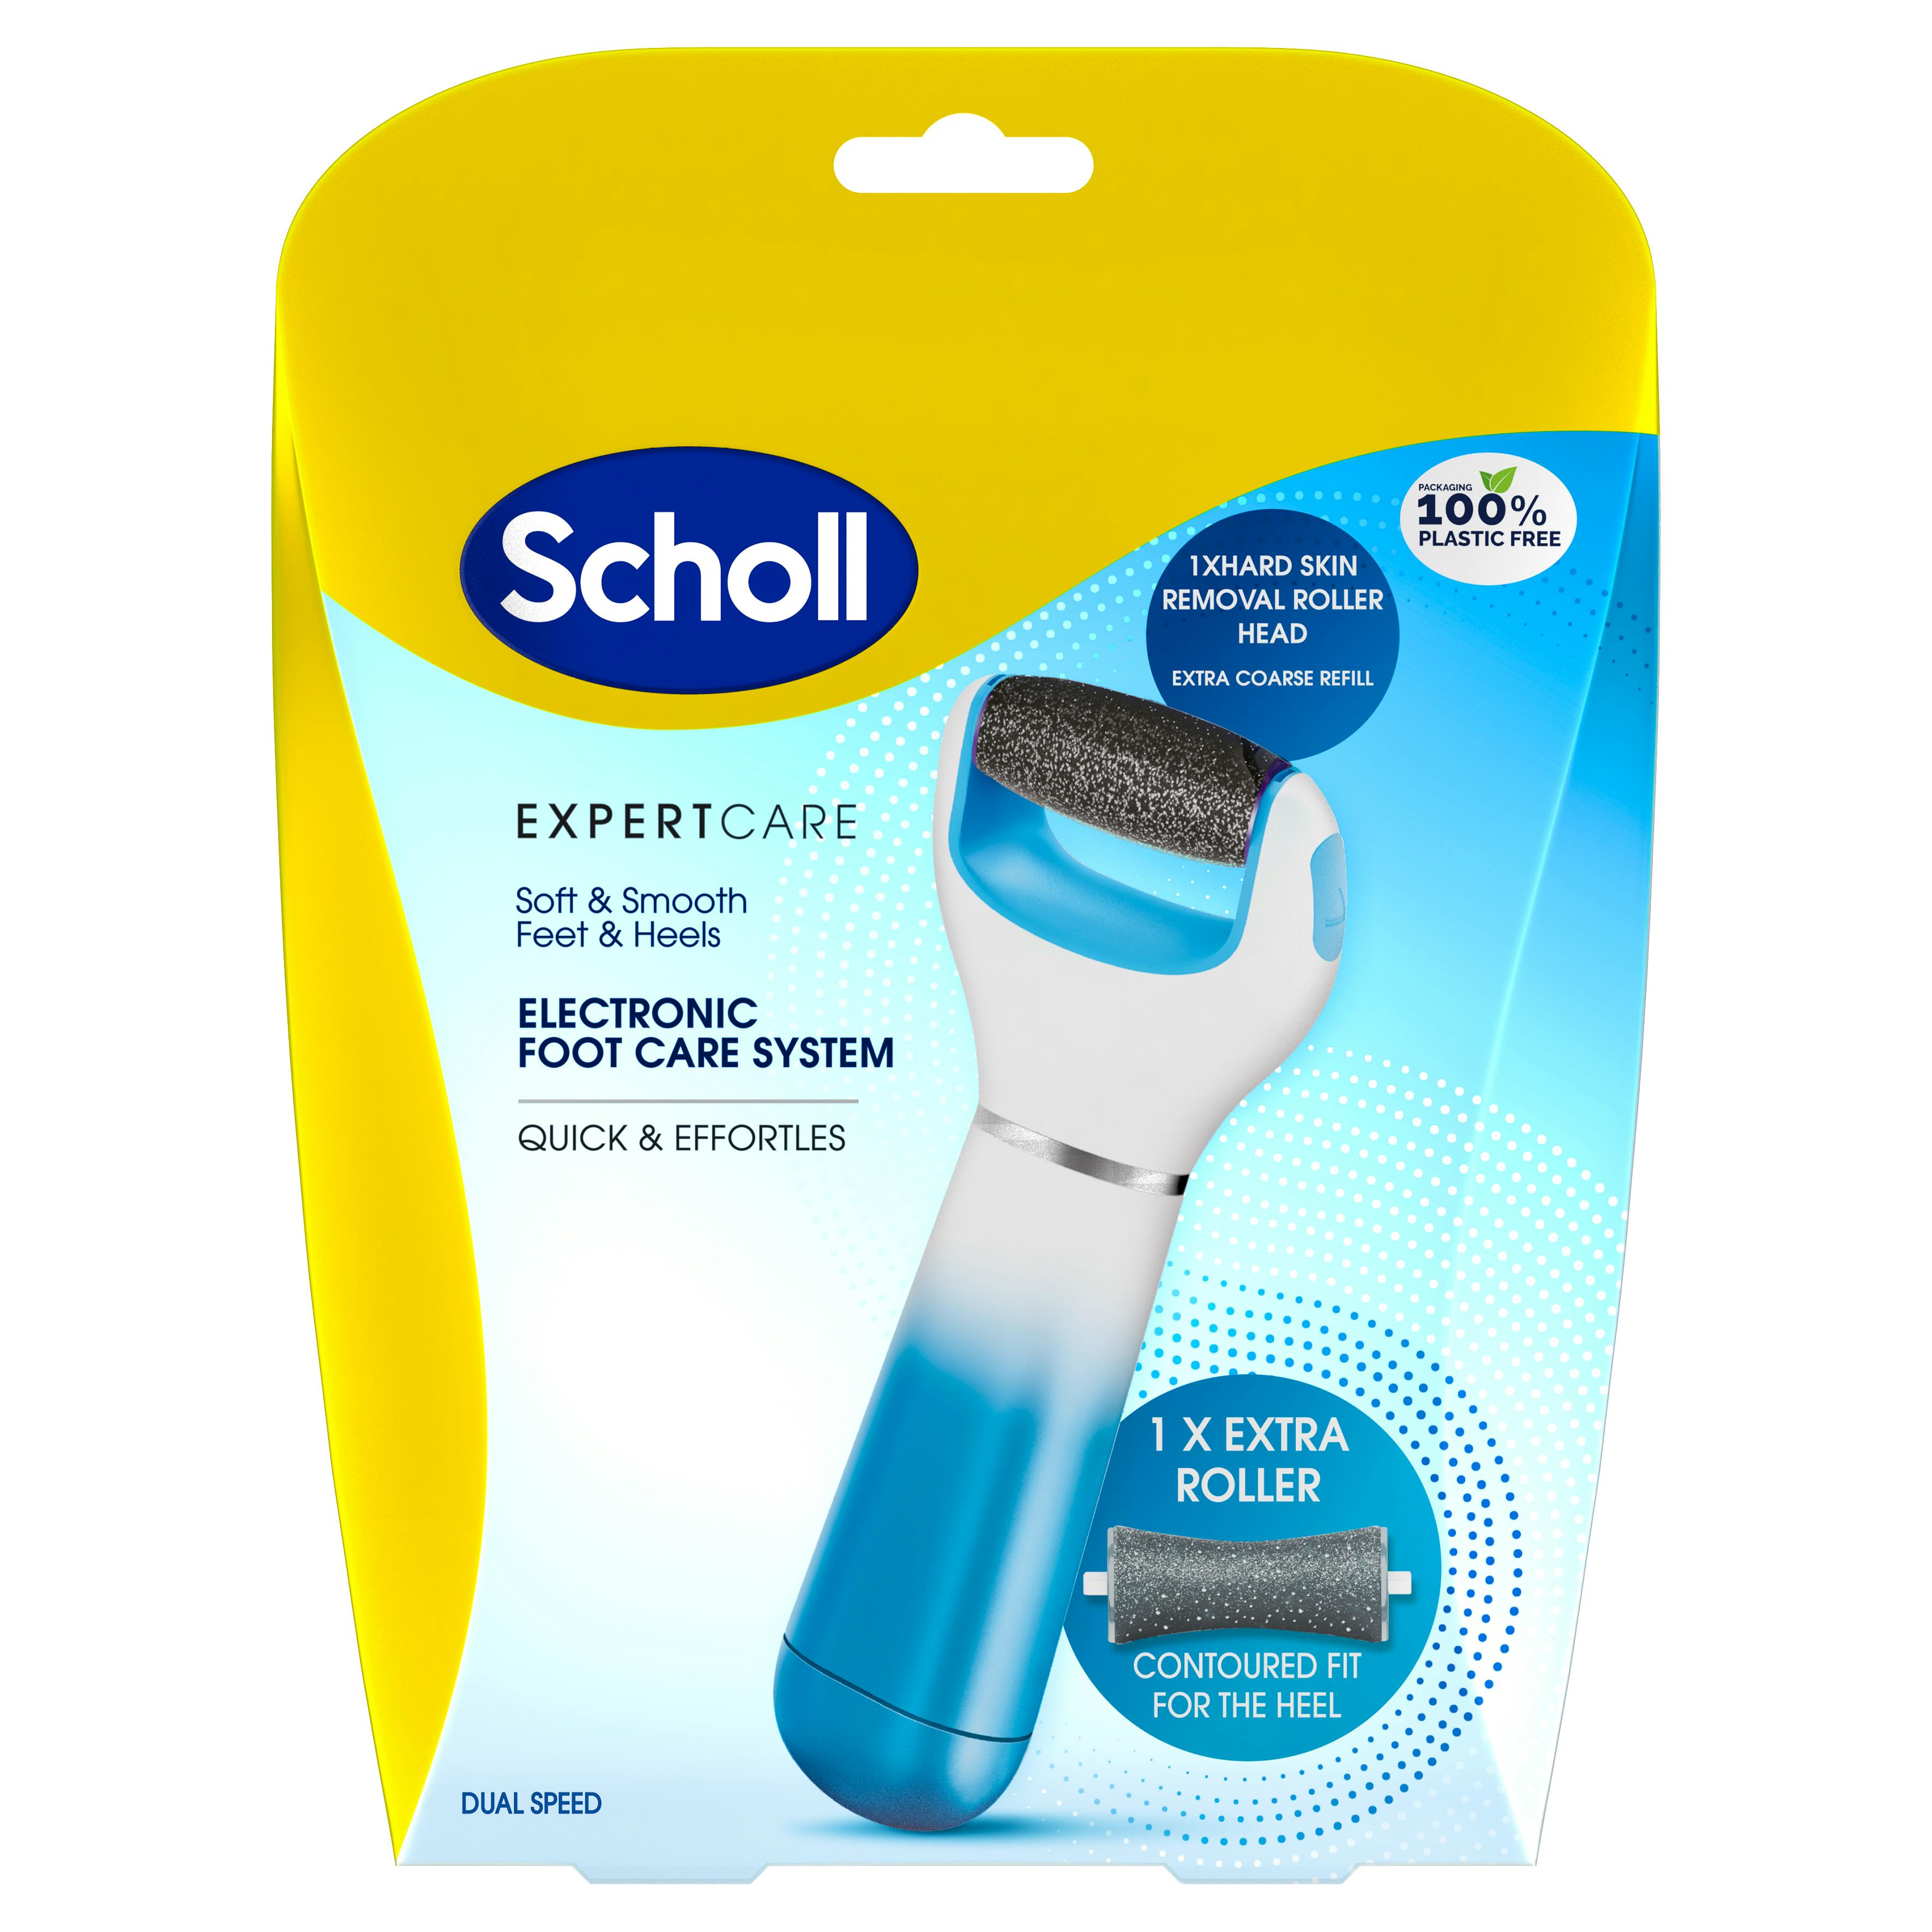 Buy Dr Scholl Velvet Smooth Nail Care Pink + Nail Oil + Bag Deals on Scholl  brand. Buy Now!!